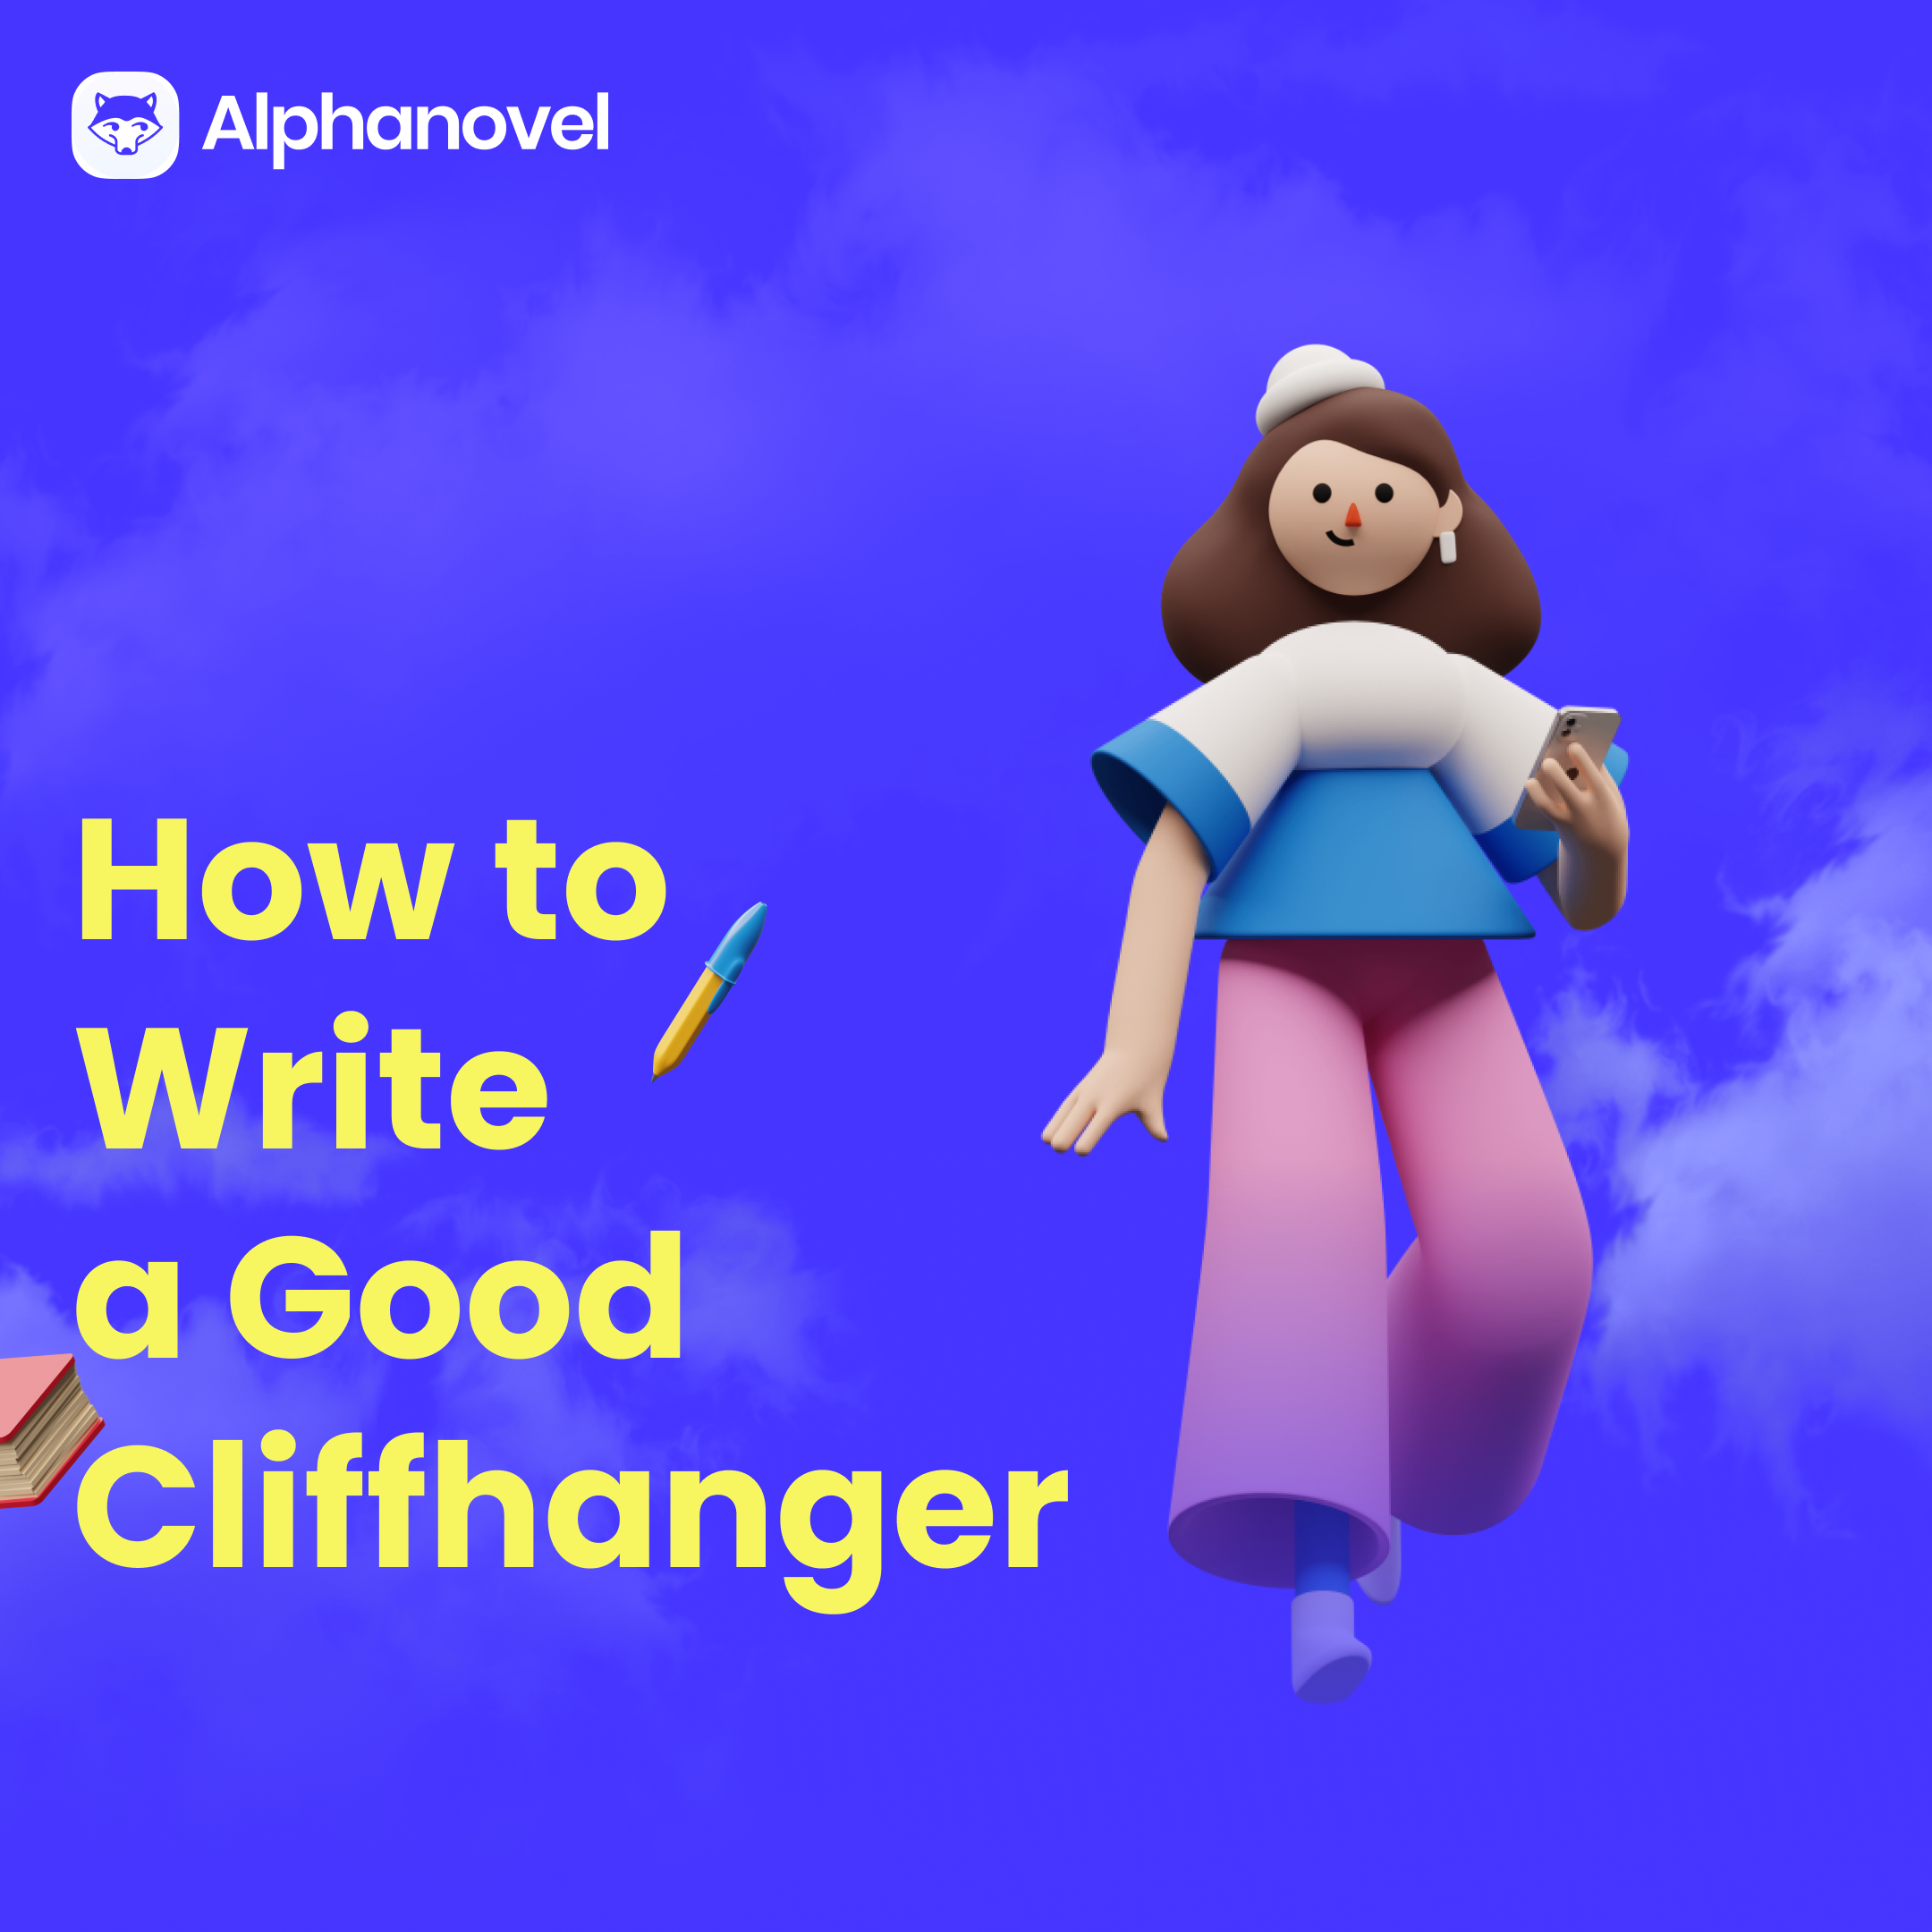 How to Write a Good Cliffhanger